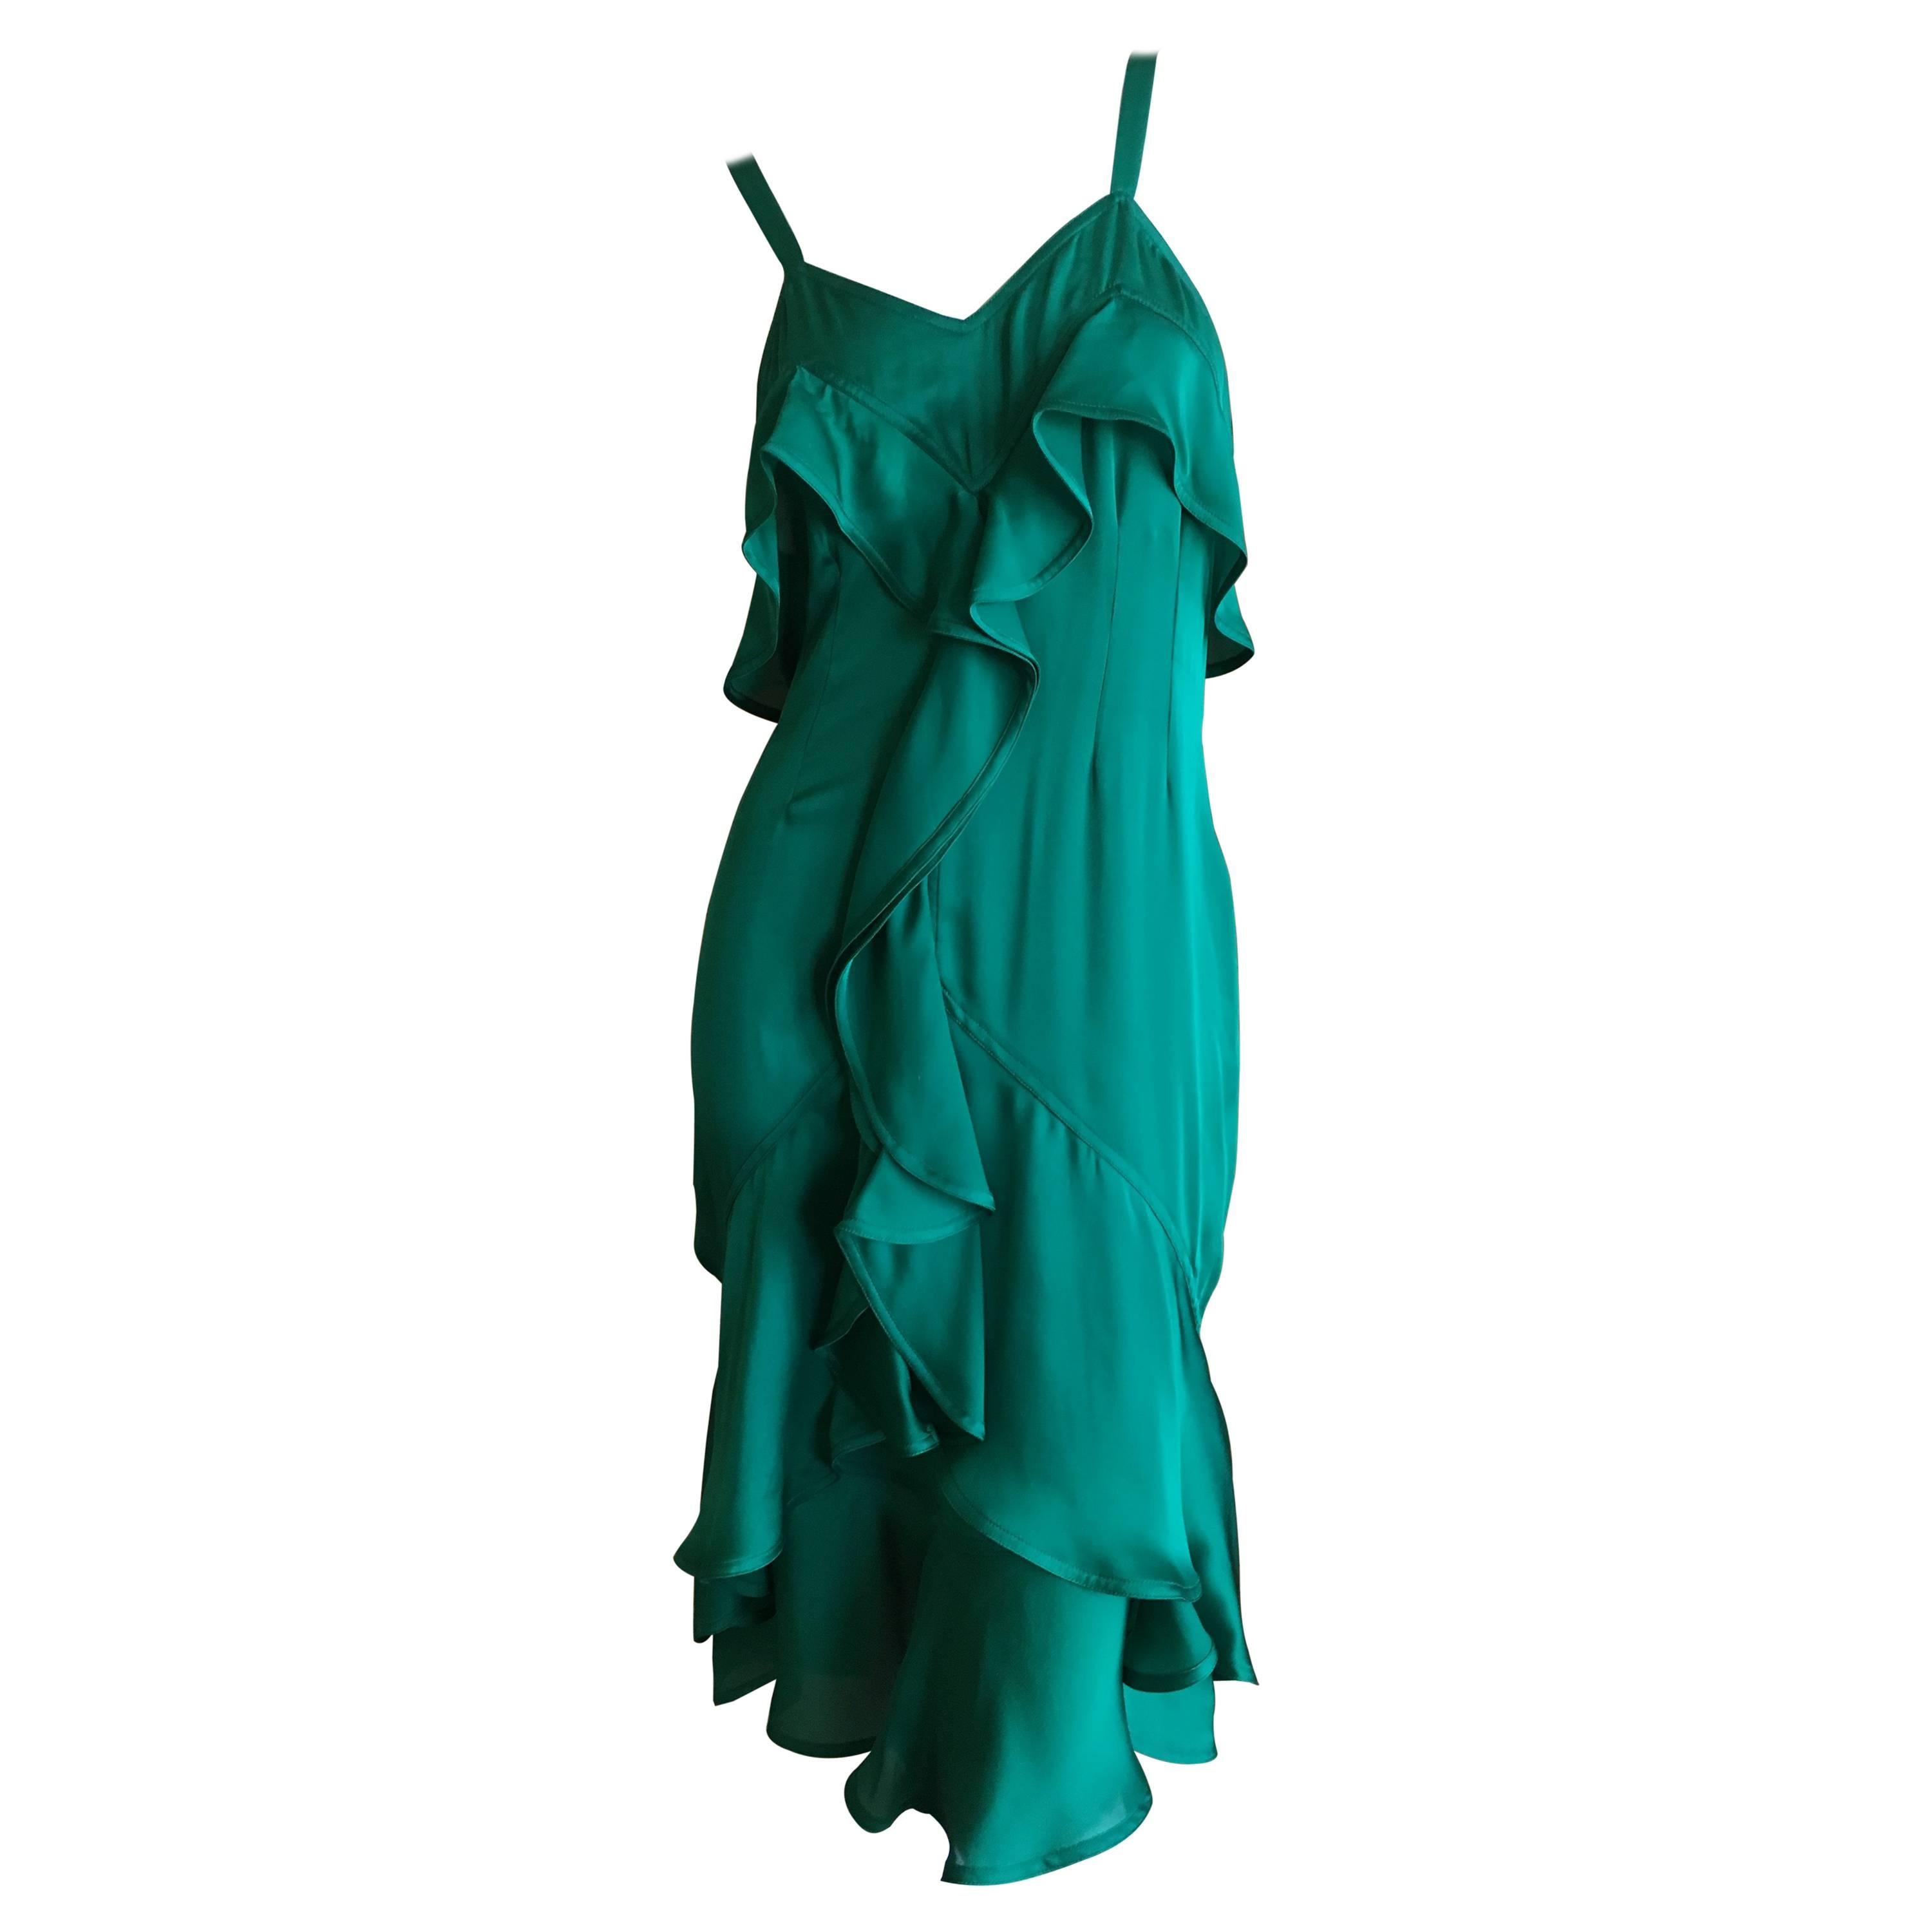 Yves Saint Laurent Tom Ford Fall 2003 Look 1 Green Ruffle Dress For Sale